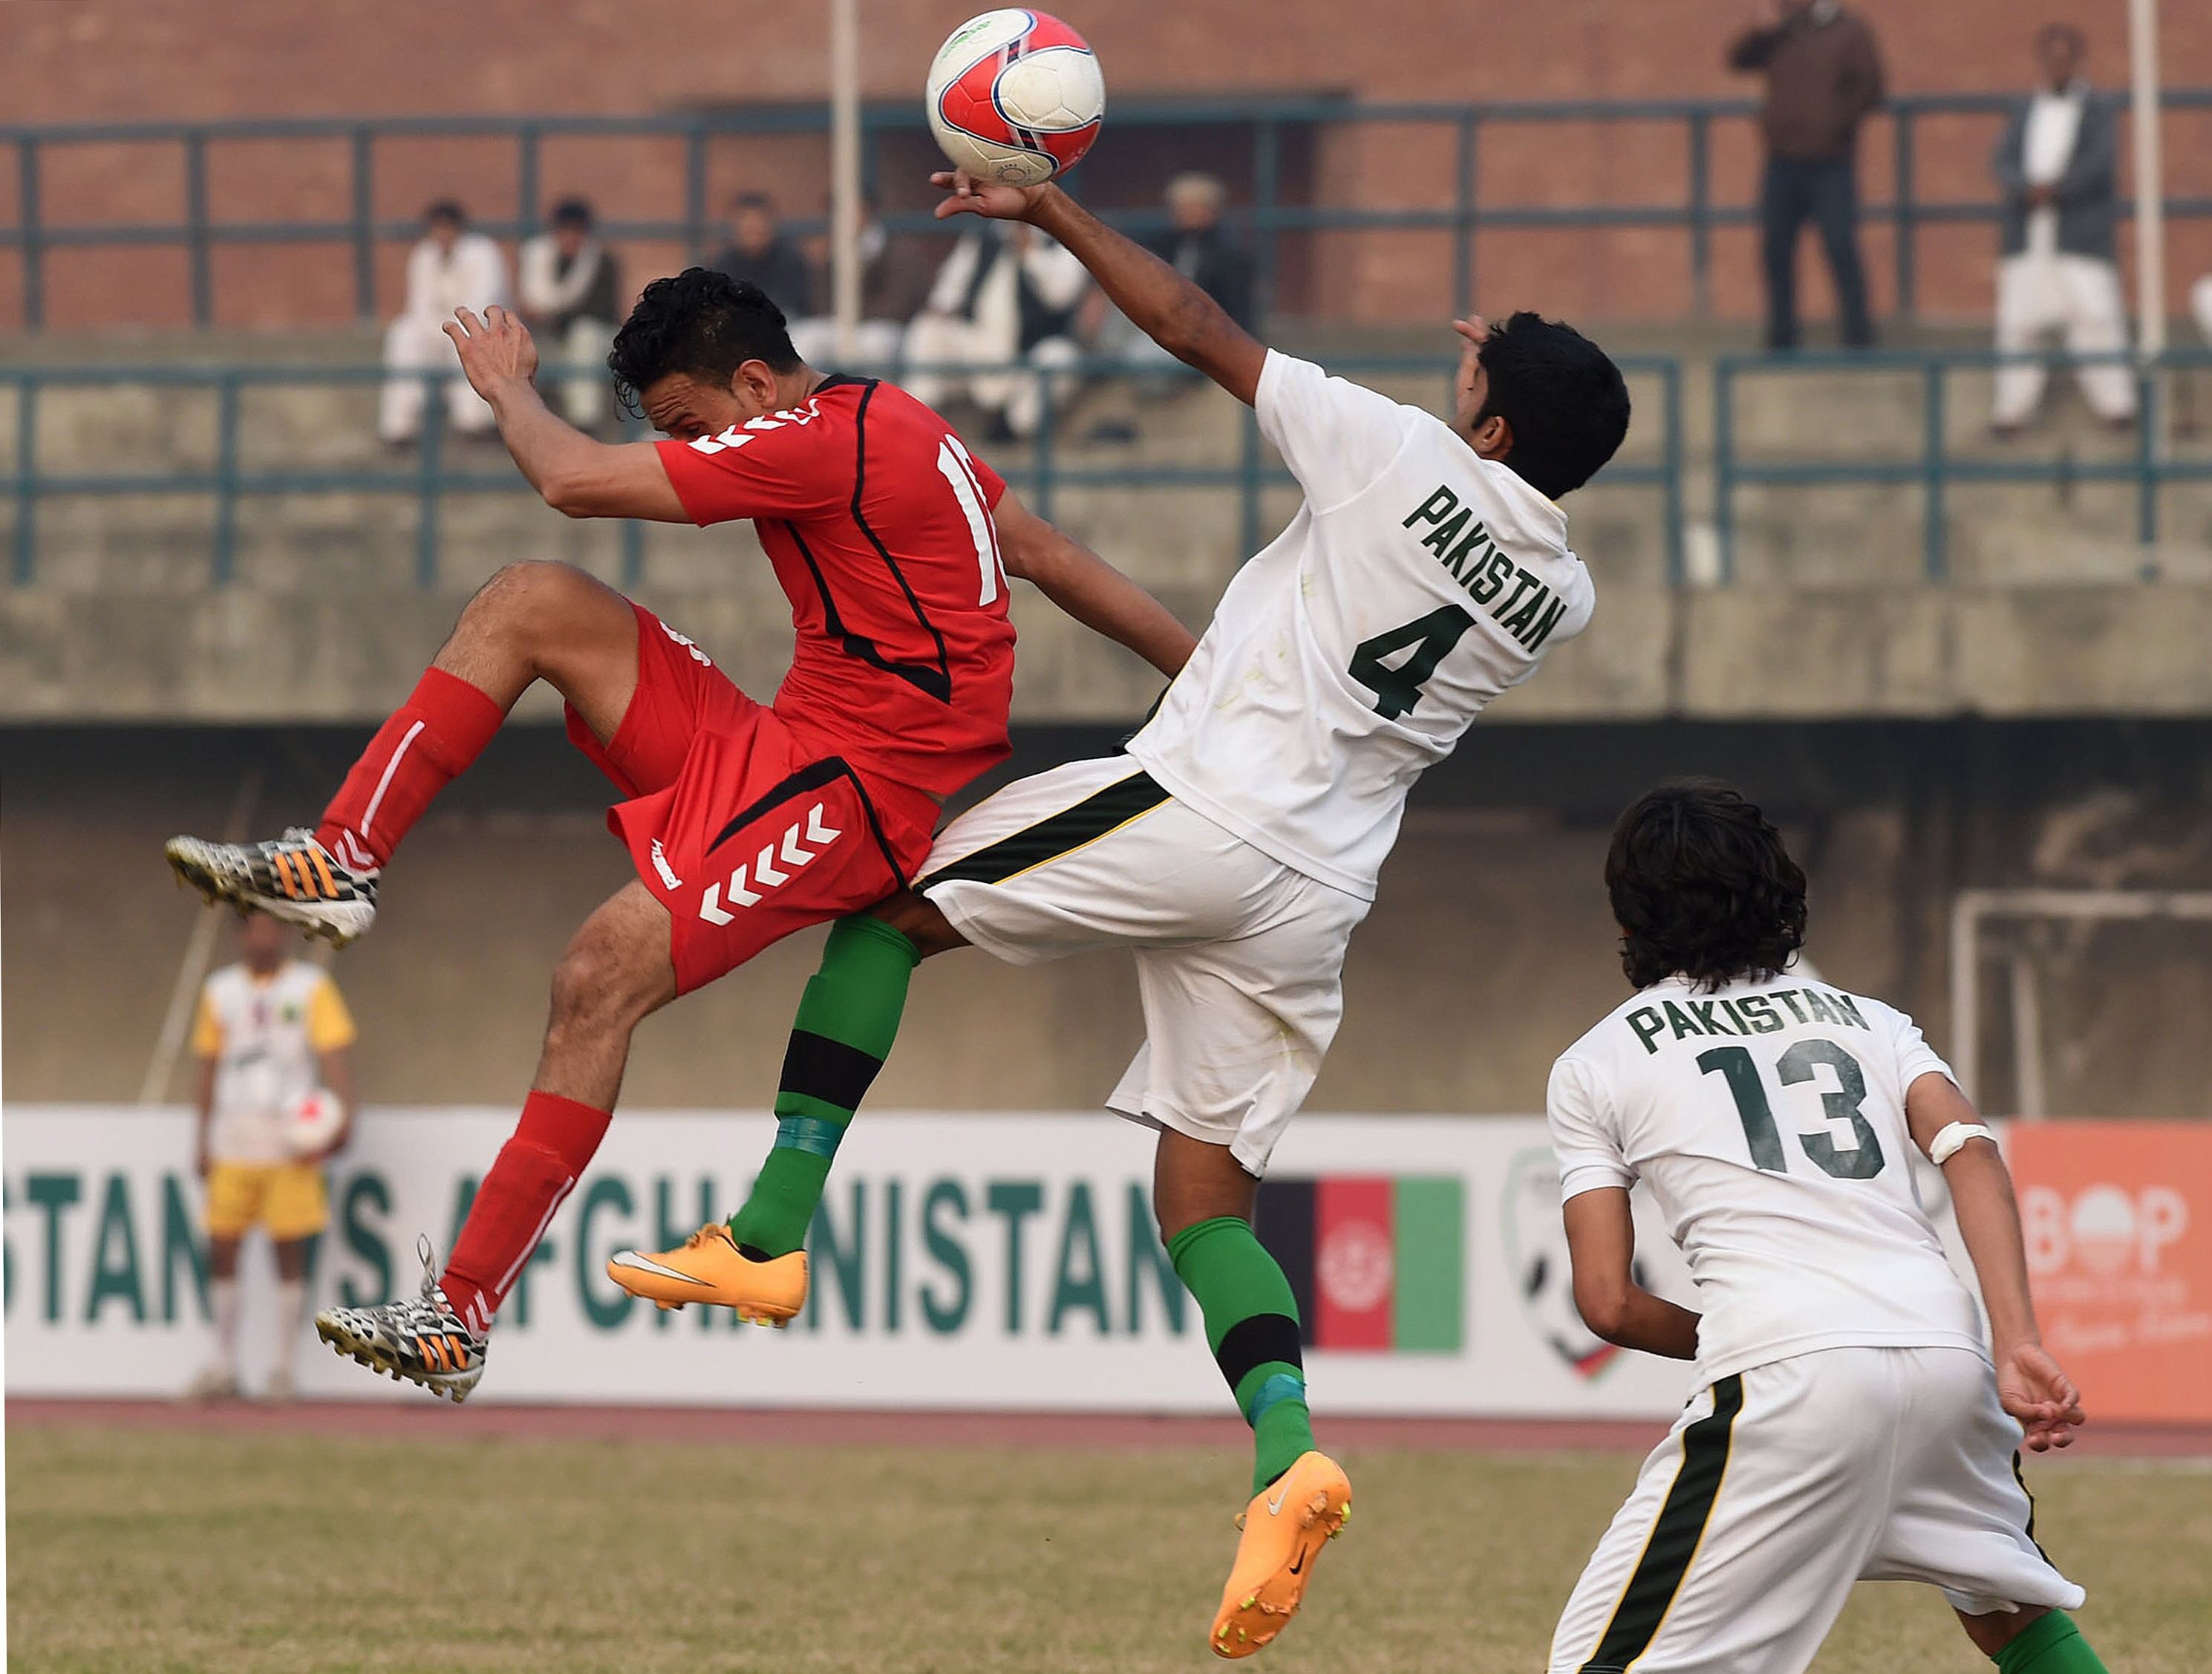 afghan 039 s ahmad arash l vies for the ball with pakistan 039 s mohammad bilal during their friendly football match at the punjab stadium in lahore on february 6 2015 photo afp